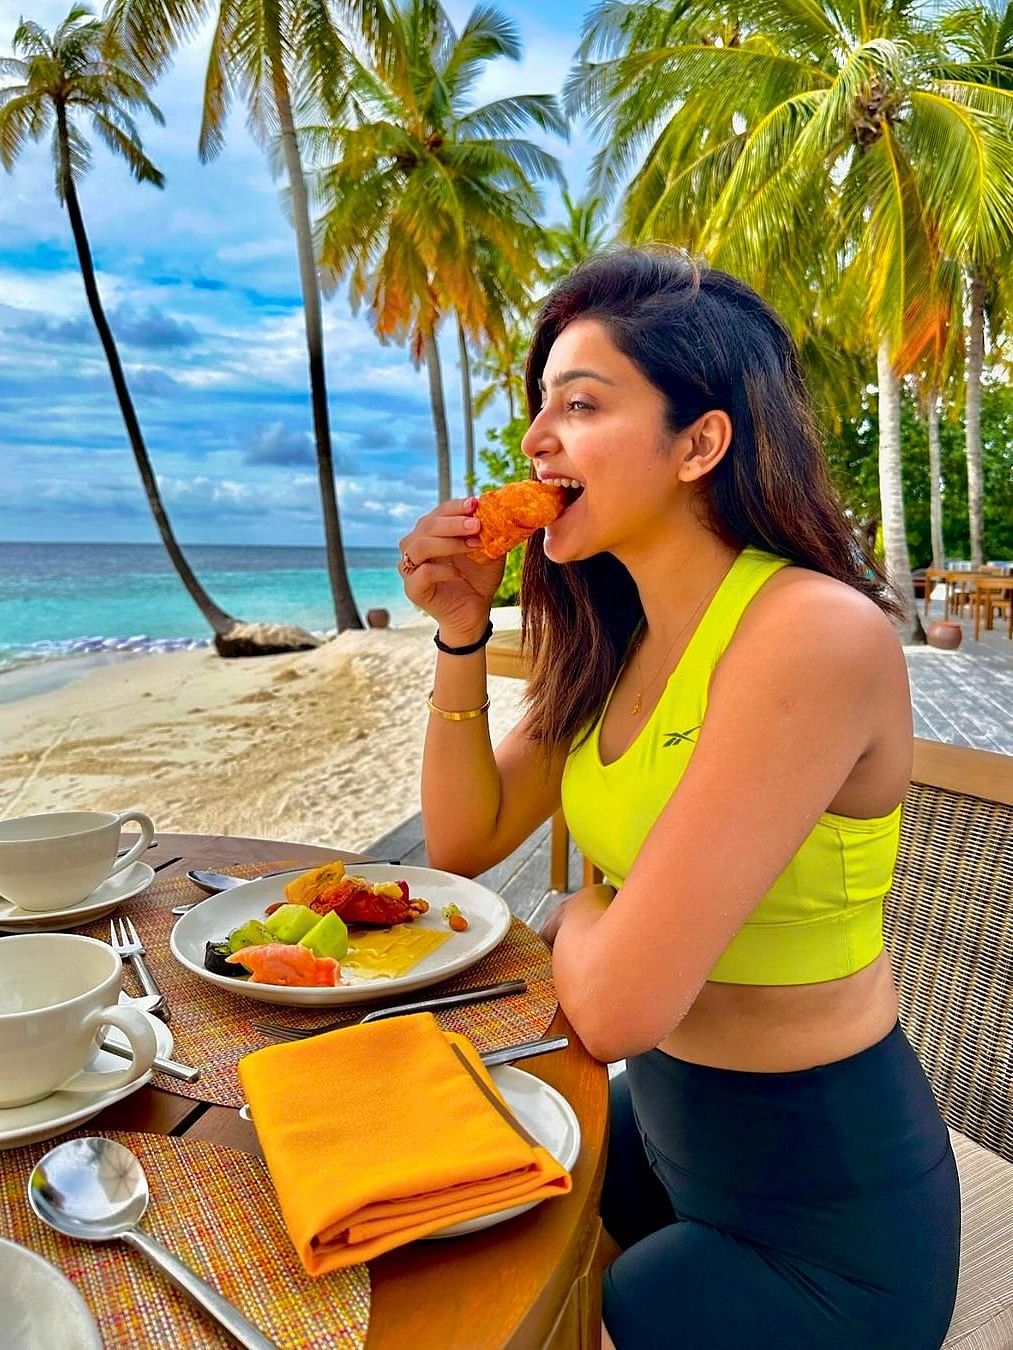 In the photograph, Avantika is seen basking in the golden sunlight while enjoying a meal.